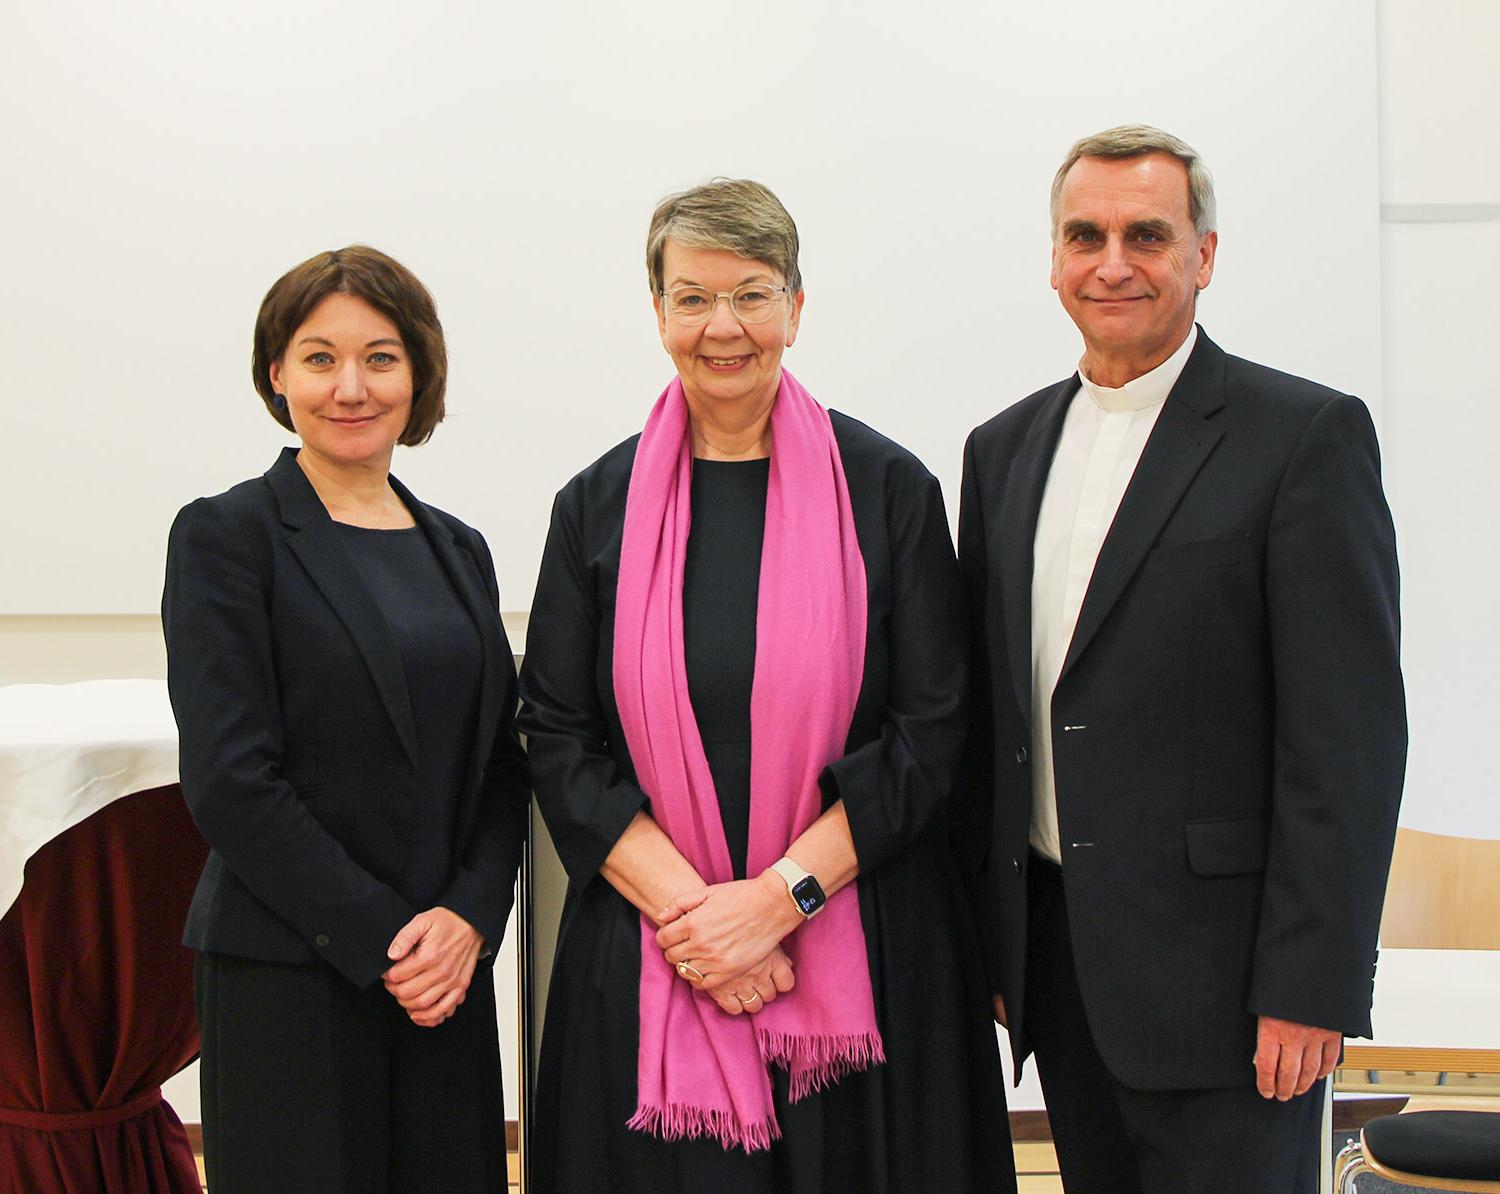 LWF General Secretary Anne Burghardt together with the Chairperson of the GNC/LWF, Leading Bishop Kristina Kühnbaum-Schmidt and Vice-Chair Oberkirchenrat Michael Martin. Photo: GNC/LWF/A. Weyermüller